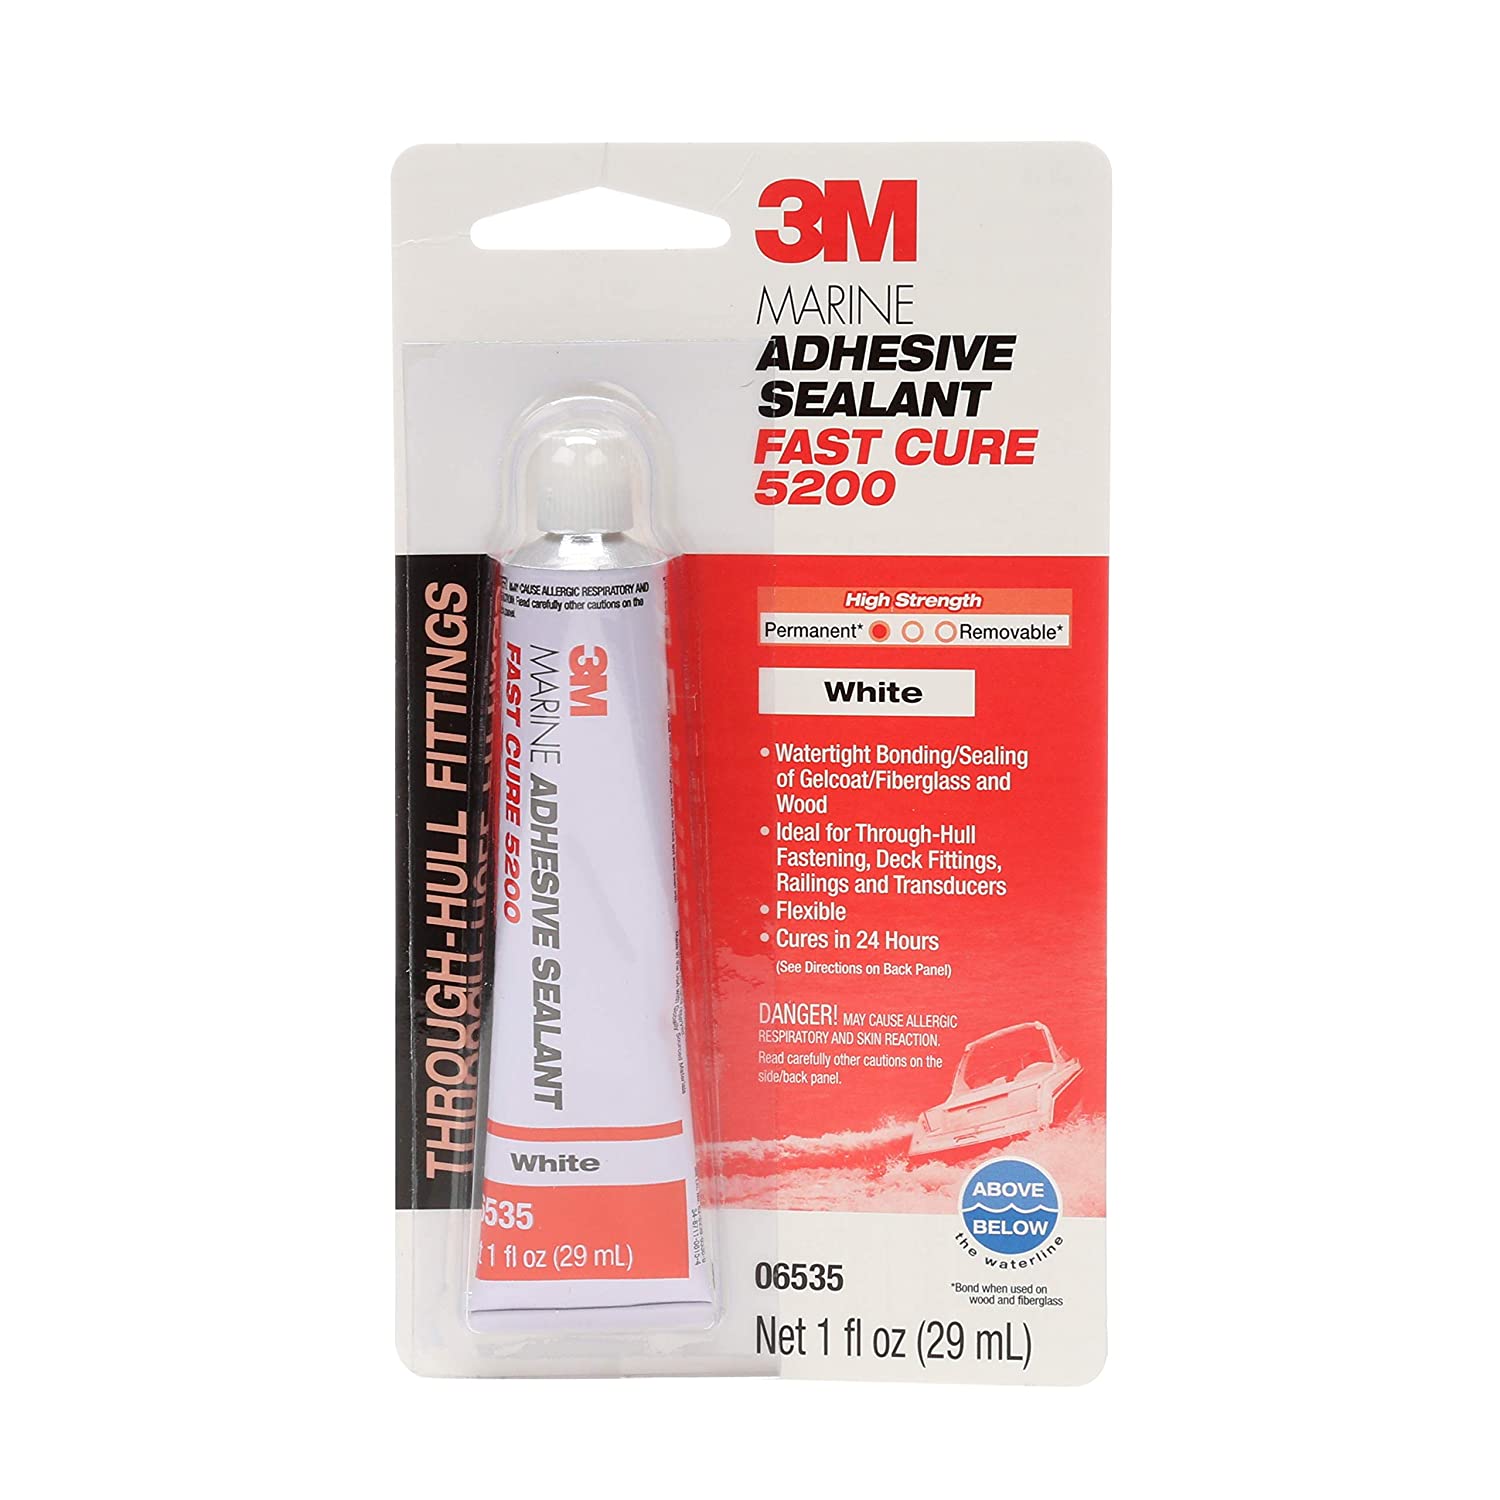 3M 5200 Fast Cure Adhesive Sealant White